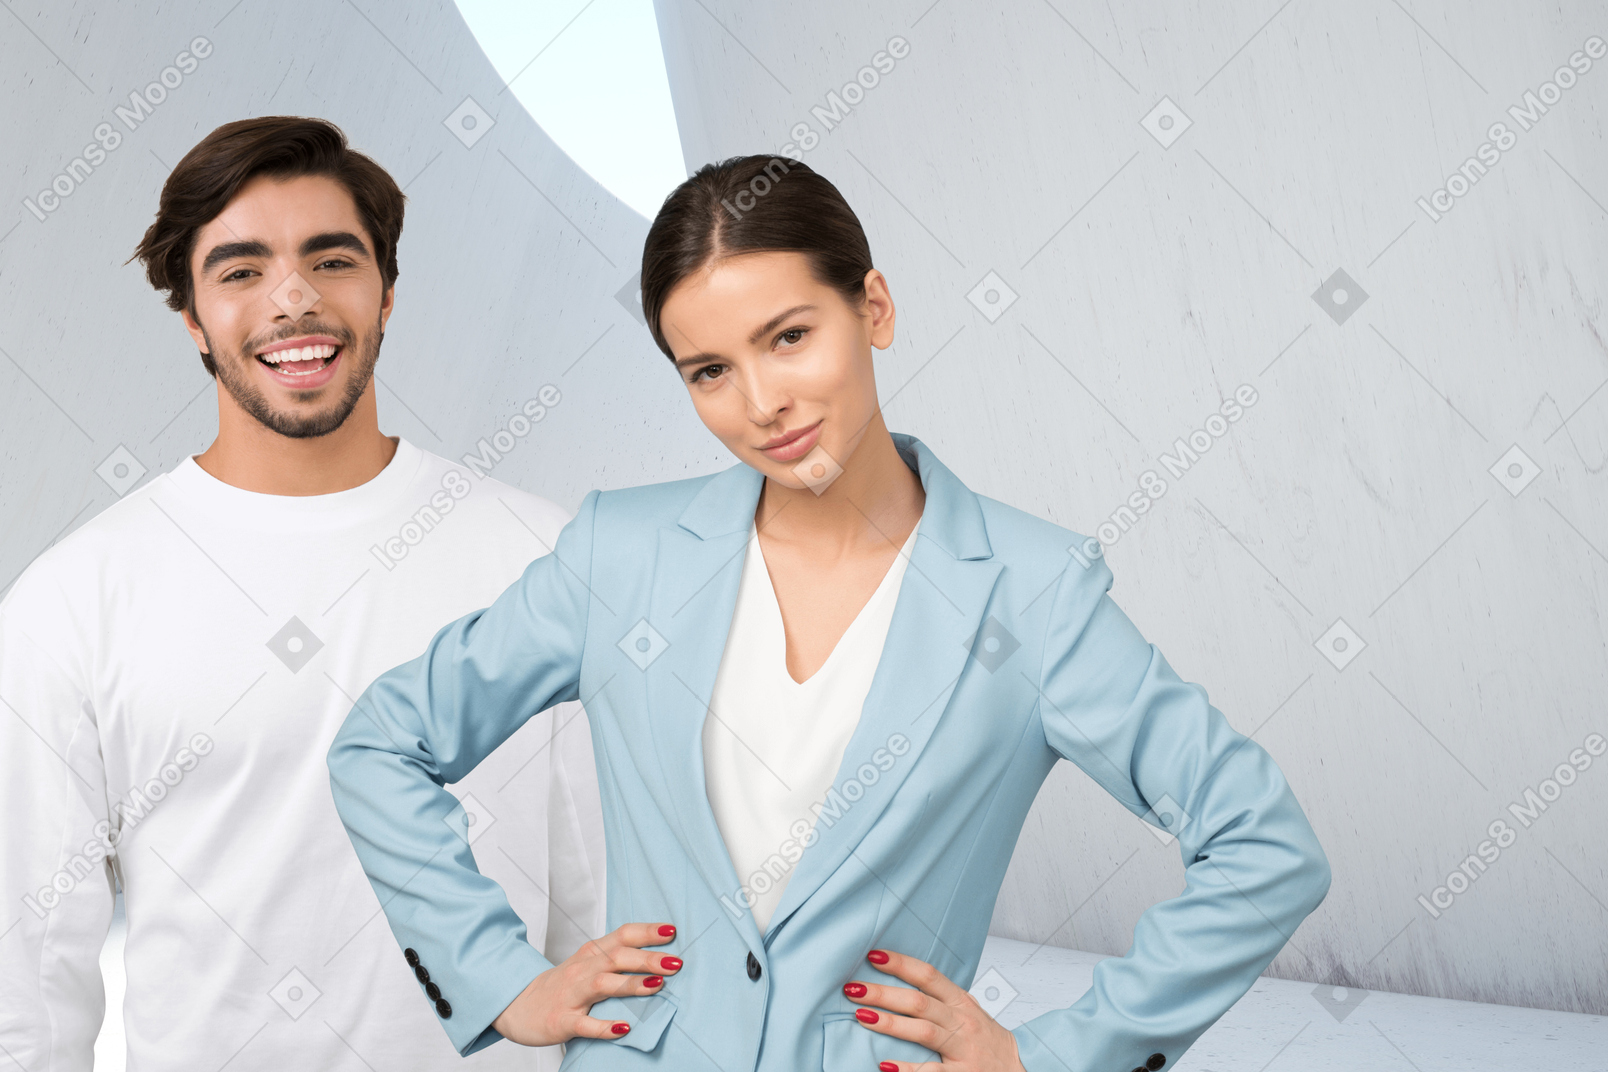 A man and a woman in an office